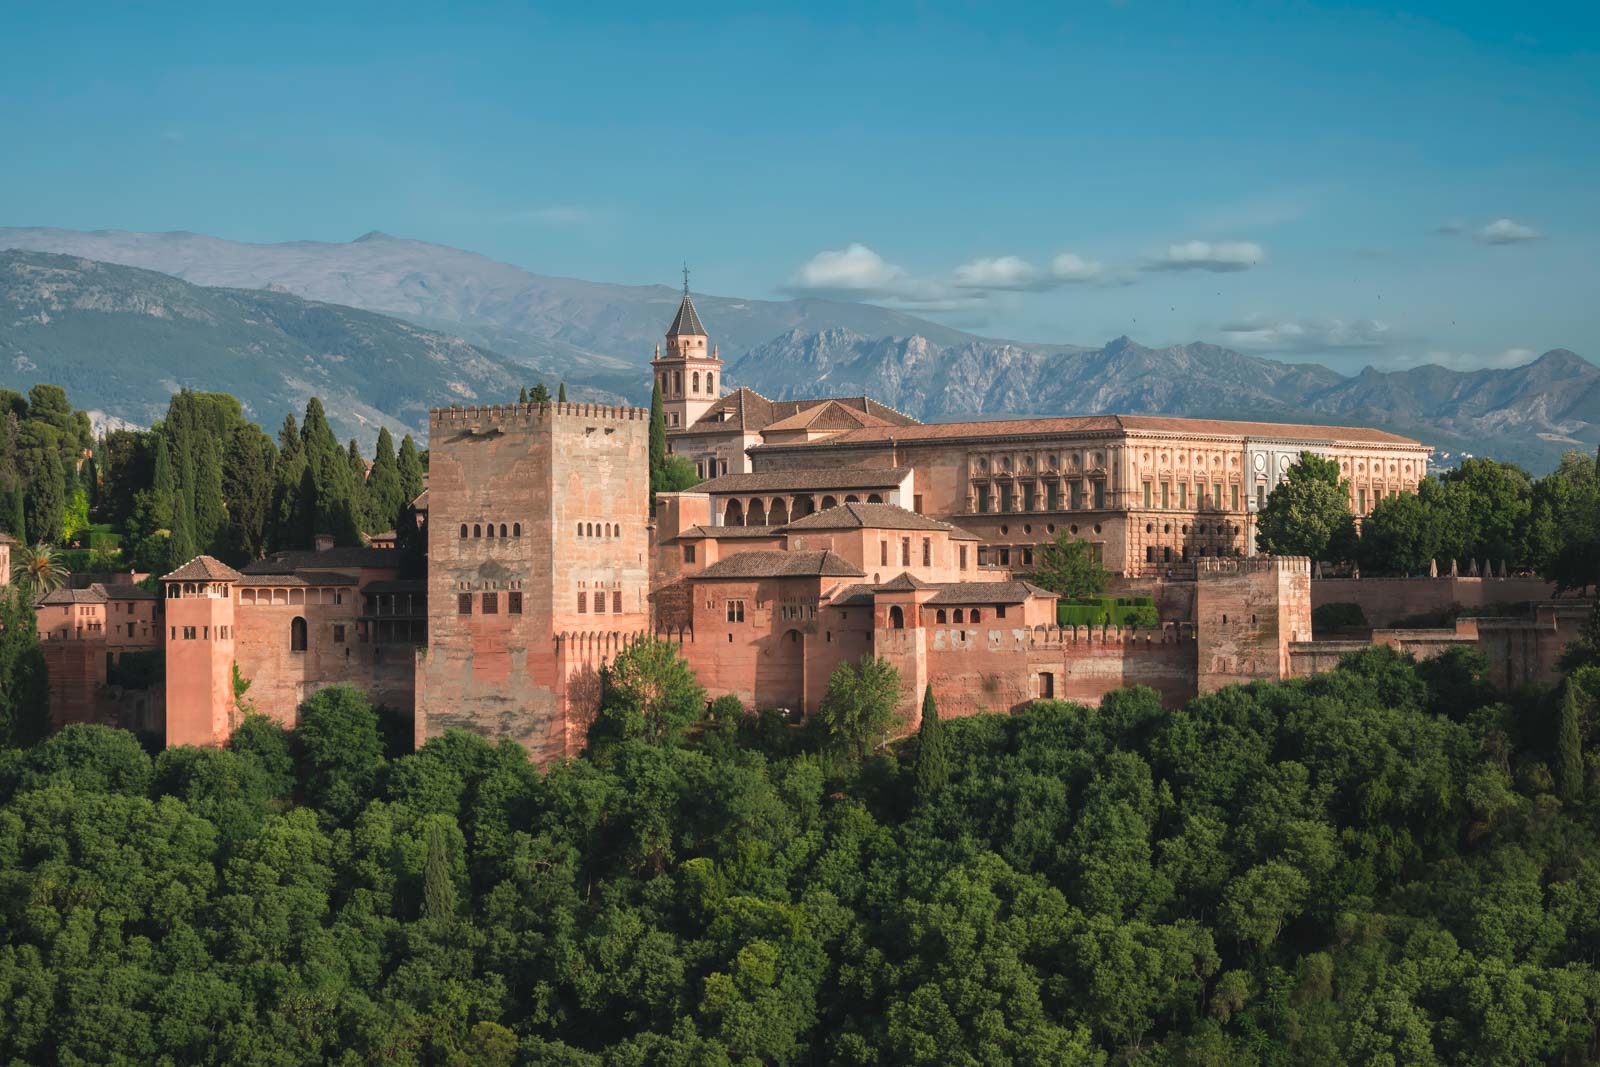 Brst Things to do in Granada Spain